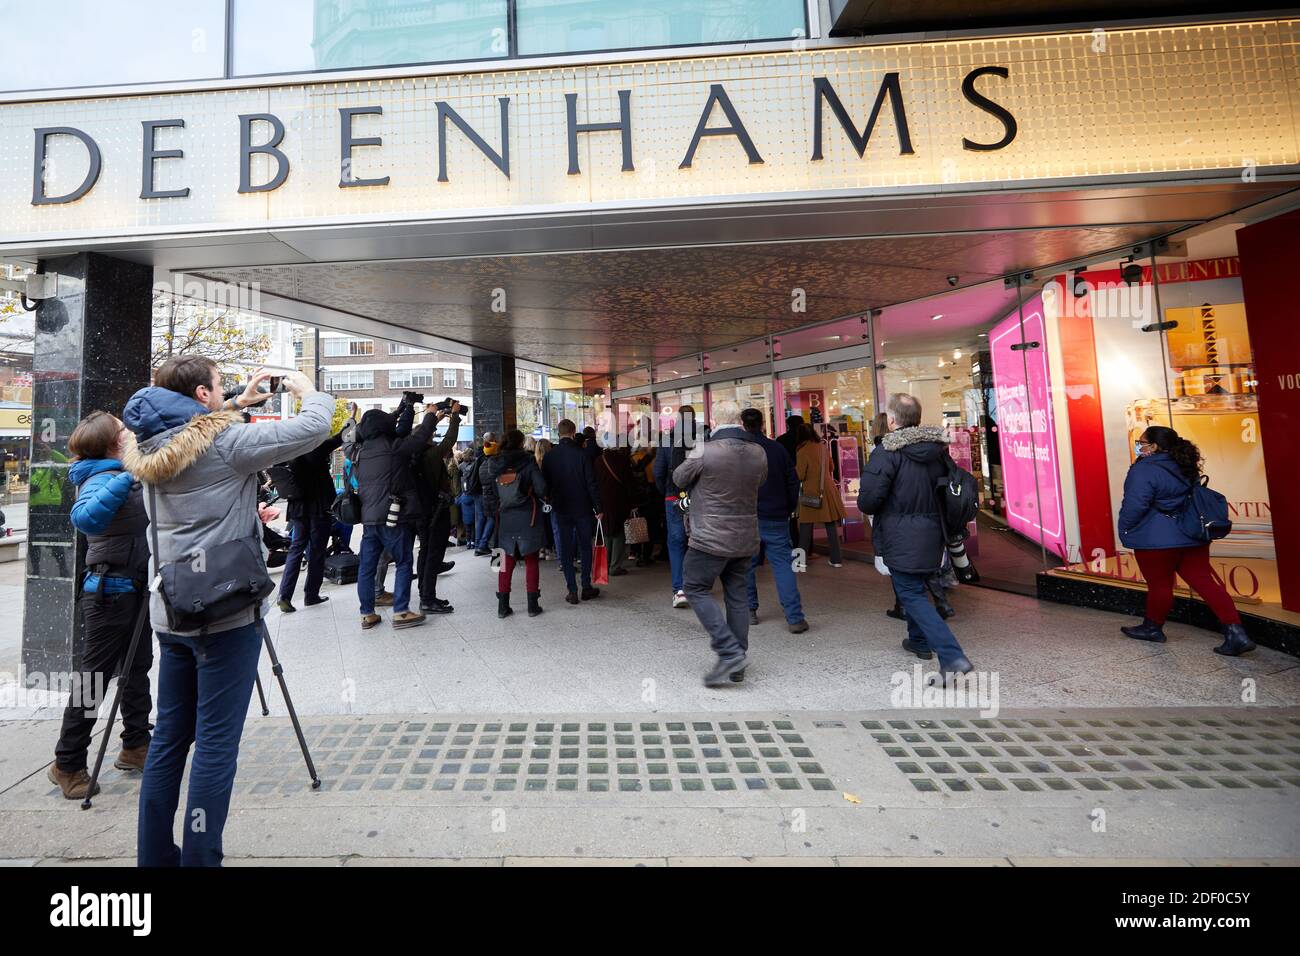 London, UK. - 2 Dec 2020: Media surround people entering the Debenhams store on Oxford Street, the first trading day since the chain announced it intends to shut all its stores. Stock Photo